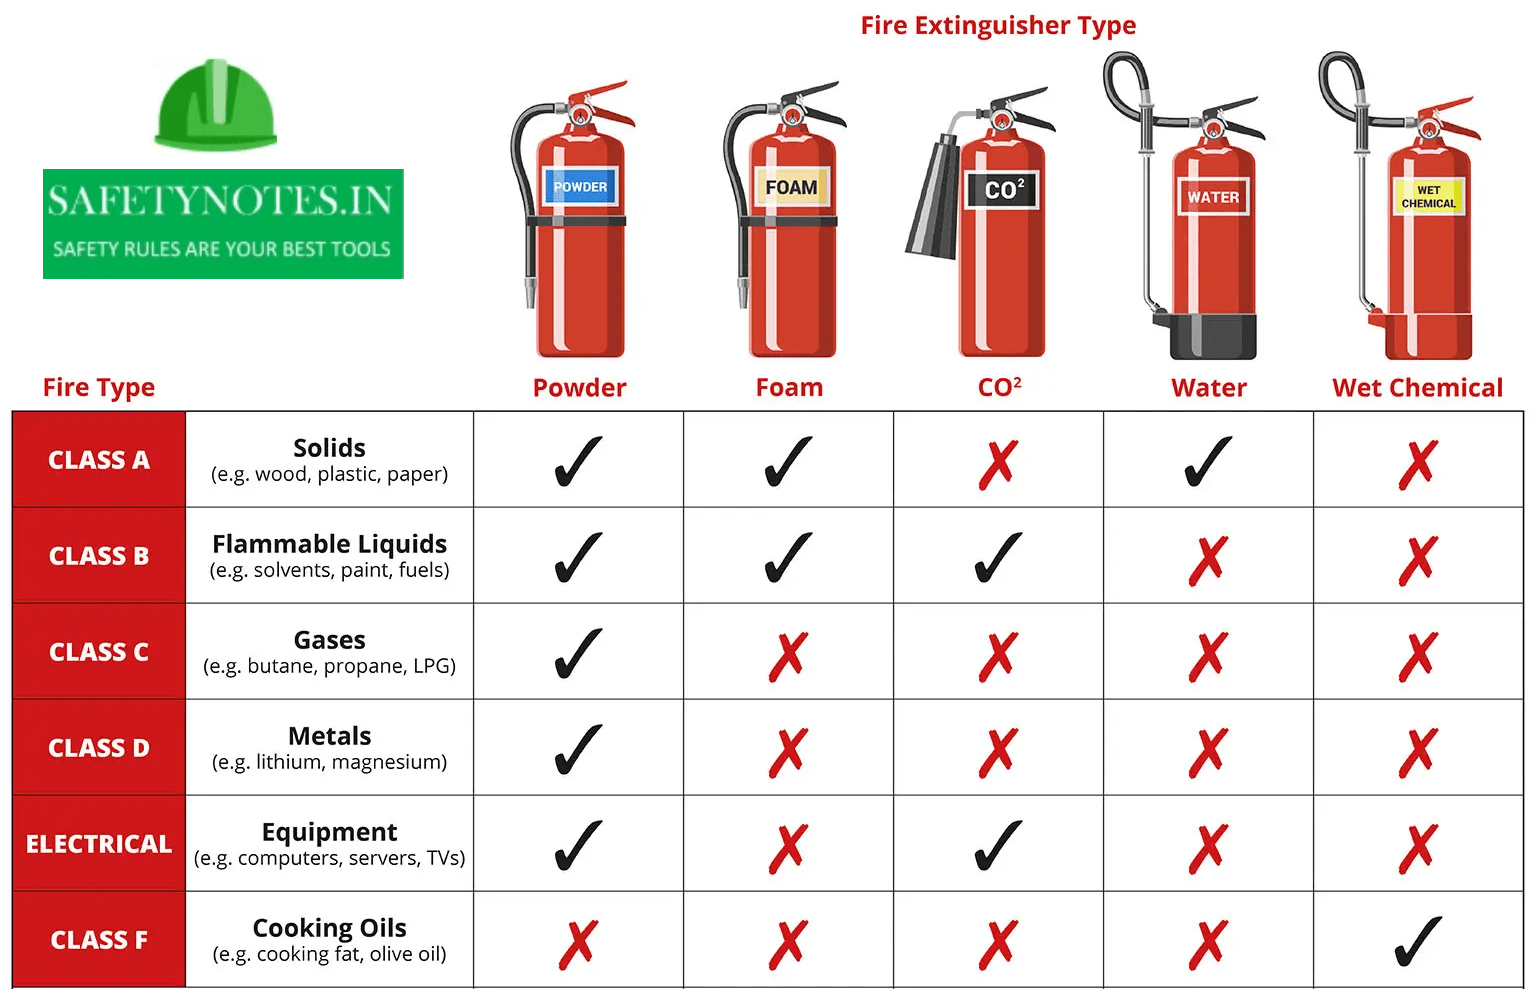 Fire Extinguishers: A Guide To Types, Uses, And Safety, 52% OFF